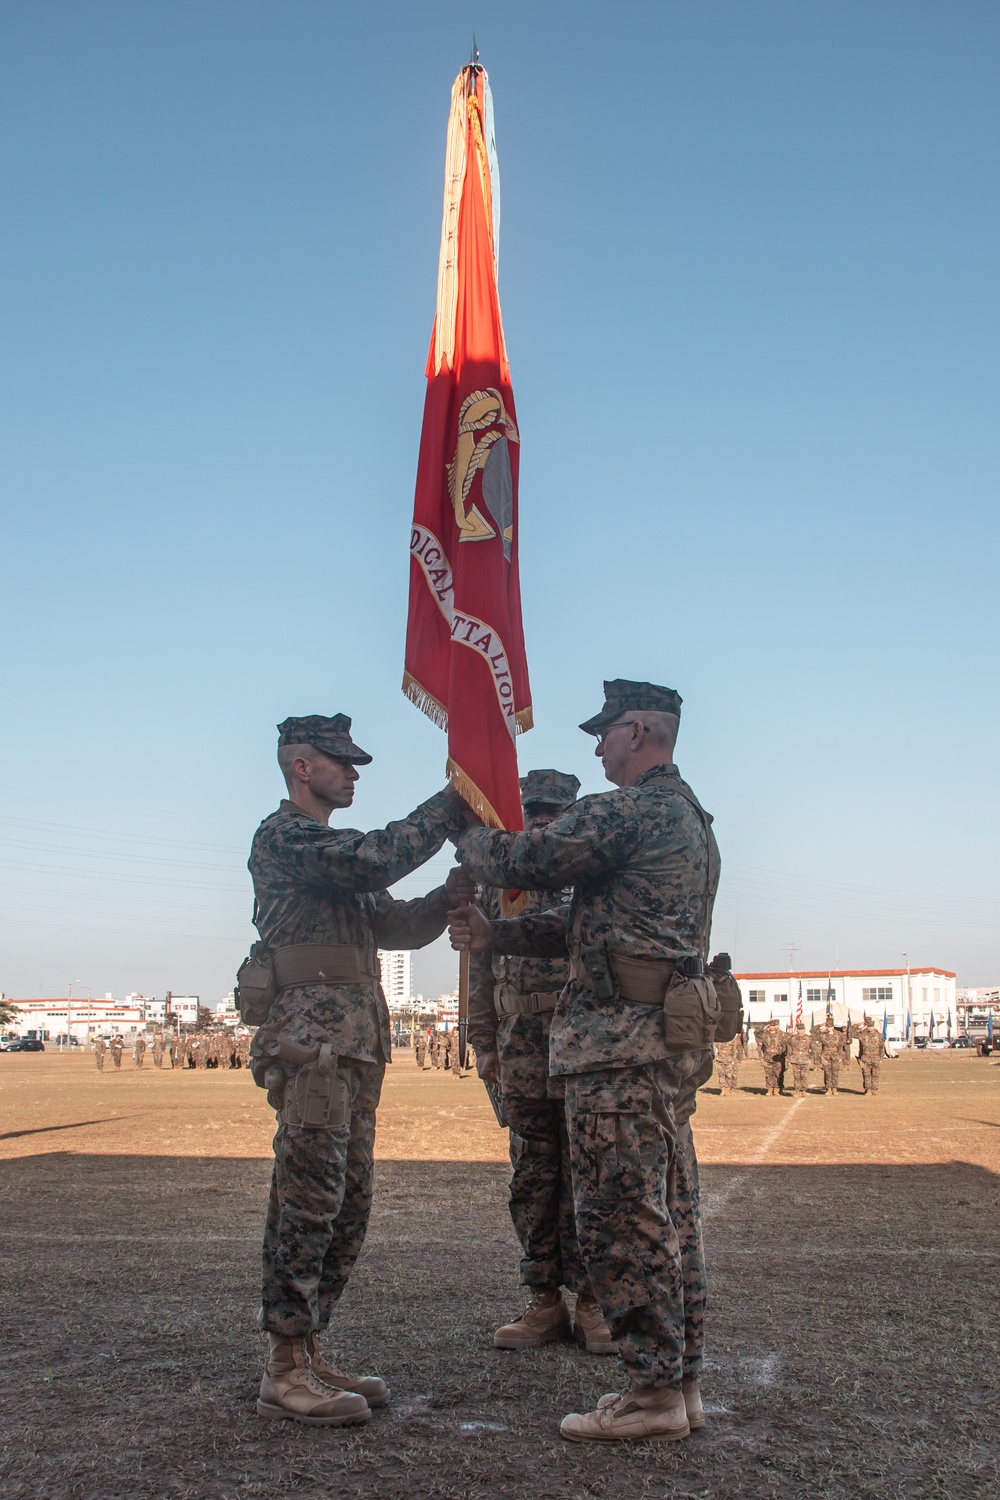 3rd Medical Battalion Change of Command Ceremony